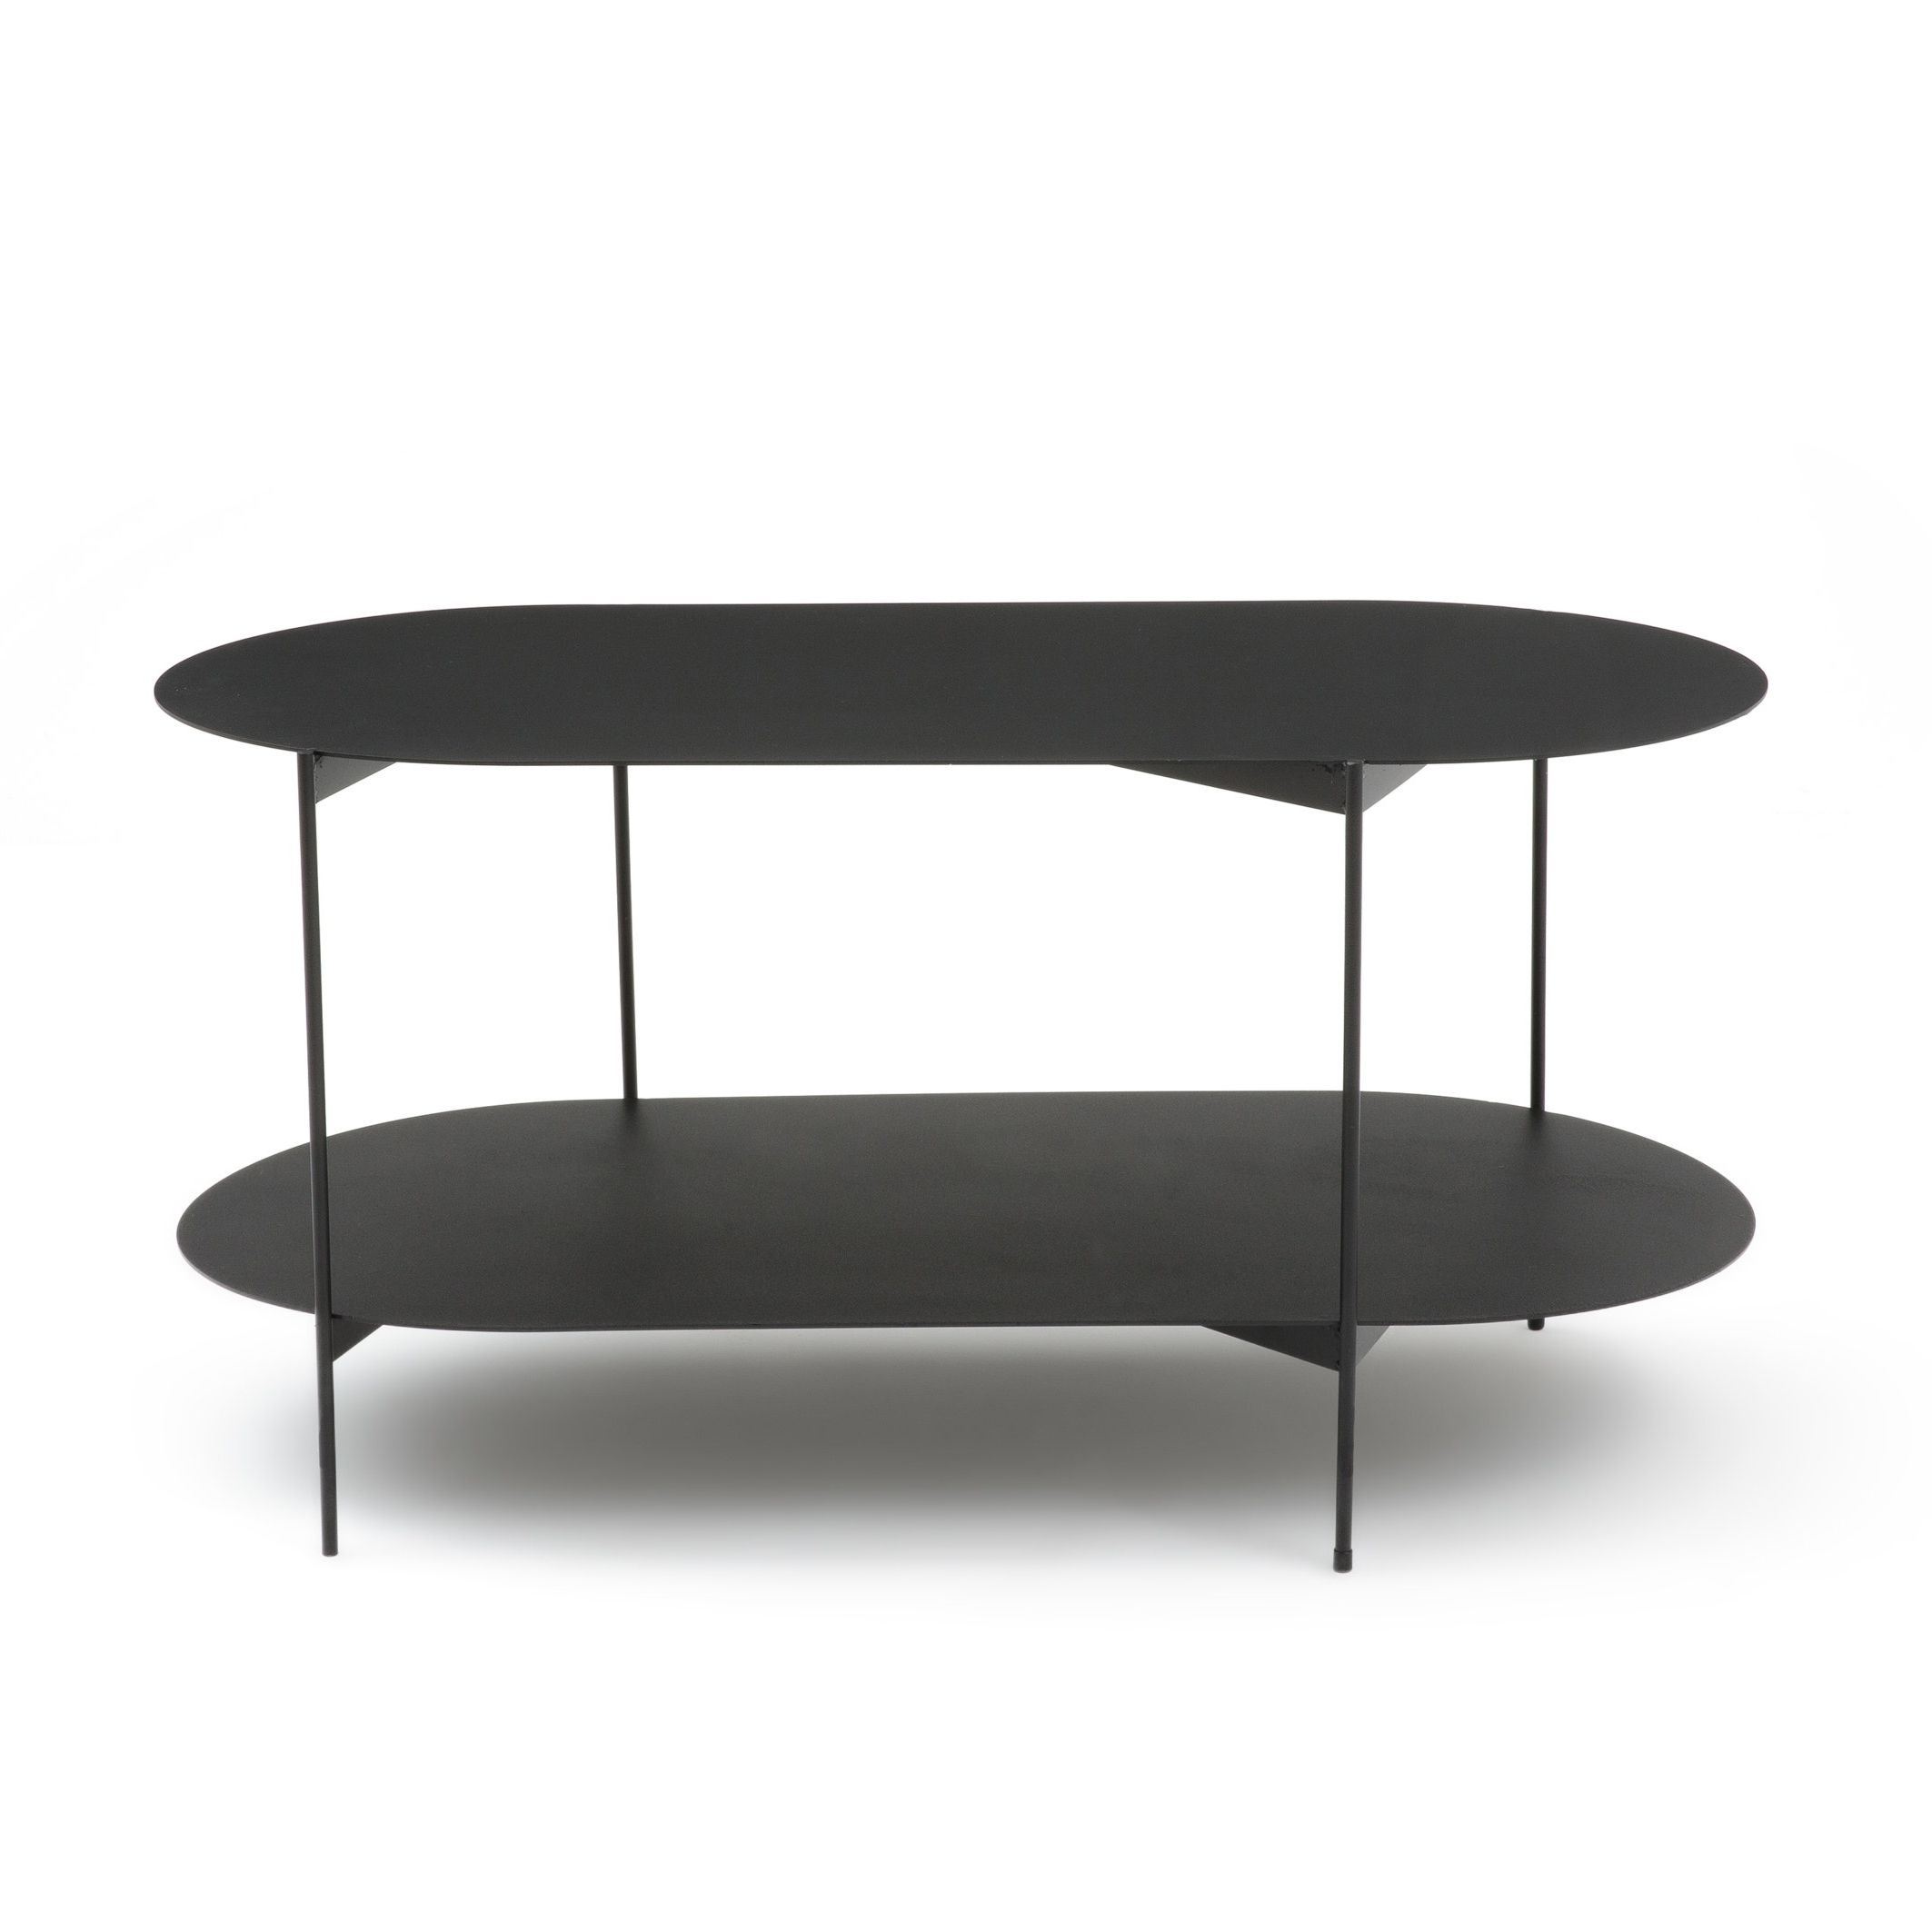 Oblone Two Tier Steel Coffee Table Black La Redoute Interieurs (View 2 of 20)